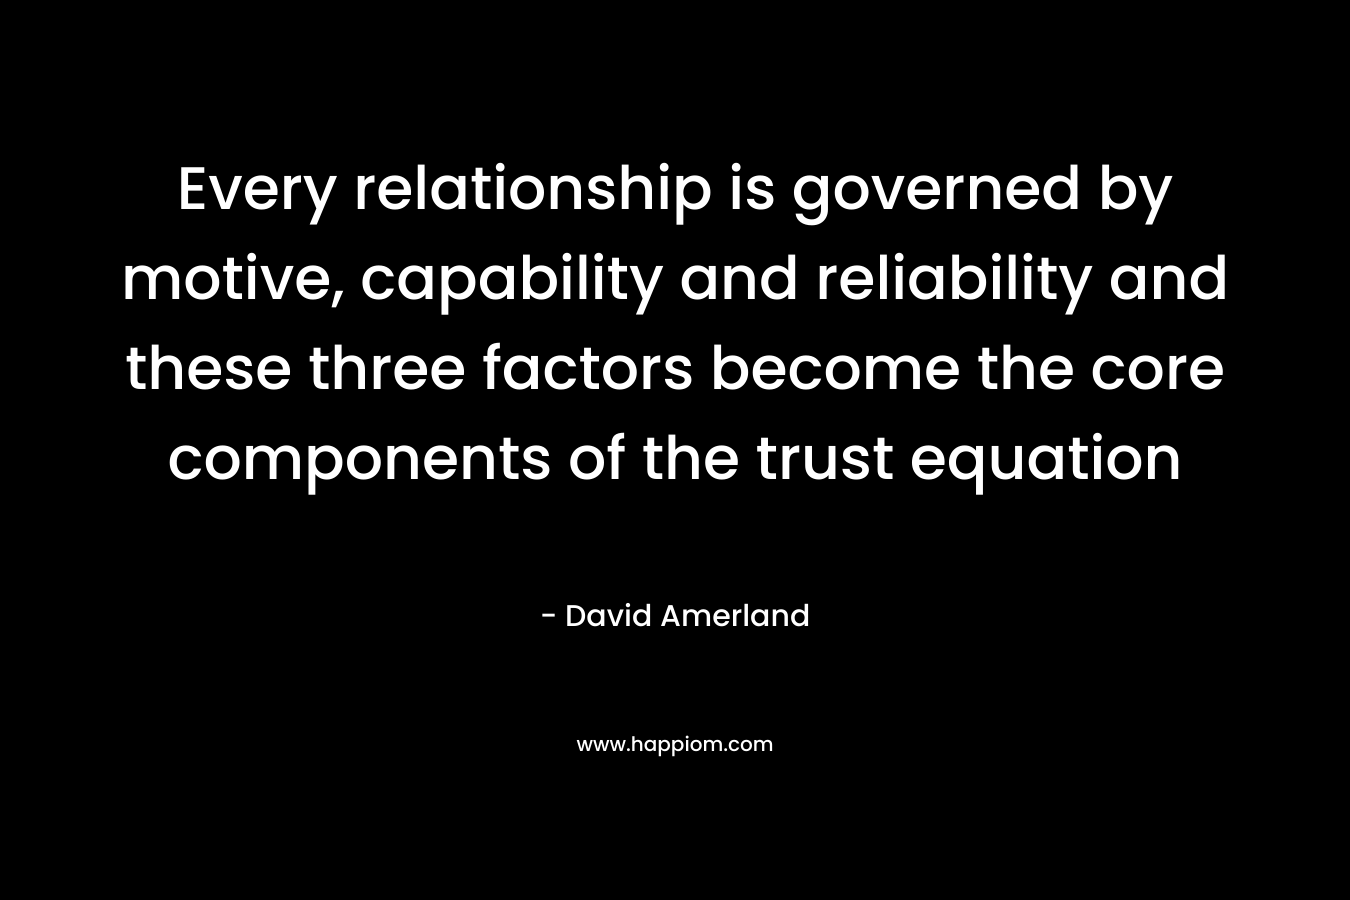 Every relationship is governed by motive, capability and reliability and these three factors become the core components of the trust equation – David Amerland